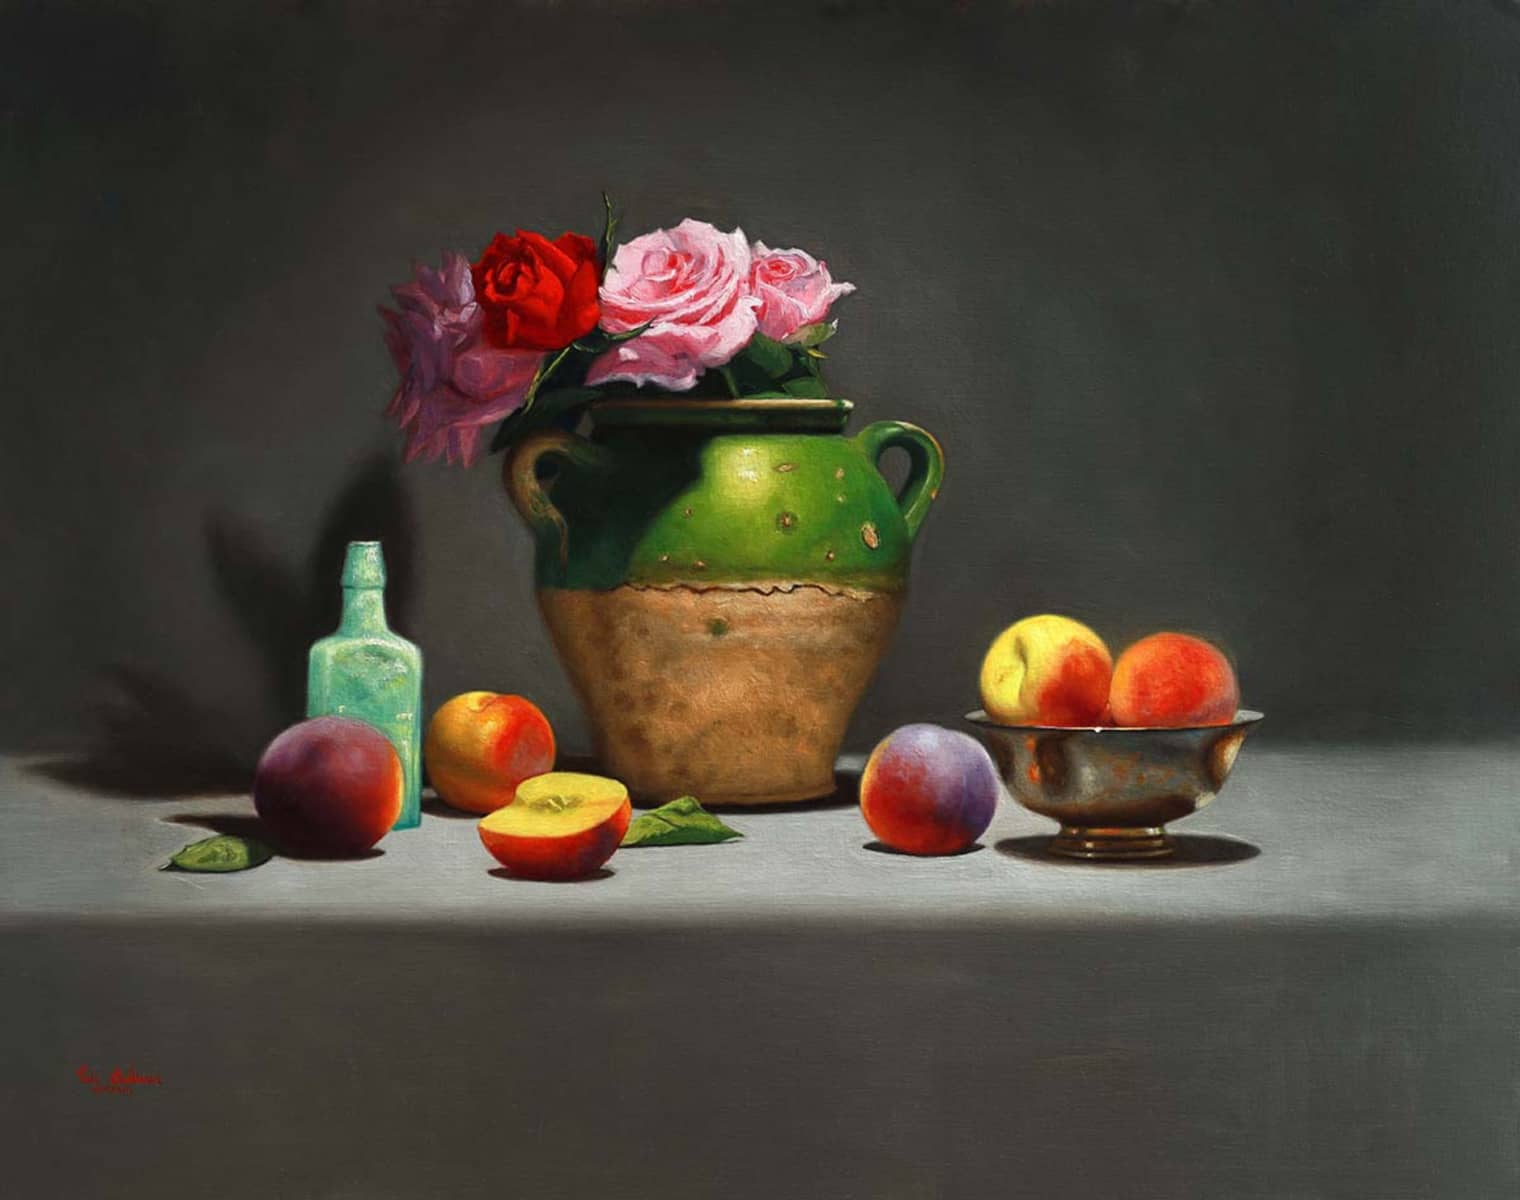 Vicki Sullivan Painting ~ 'French Confit Pot with Peaches and Roses' - Curate Art & Design Gallery Sorrento Mornington Peninsula Melbourne